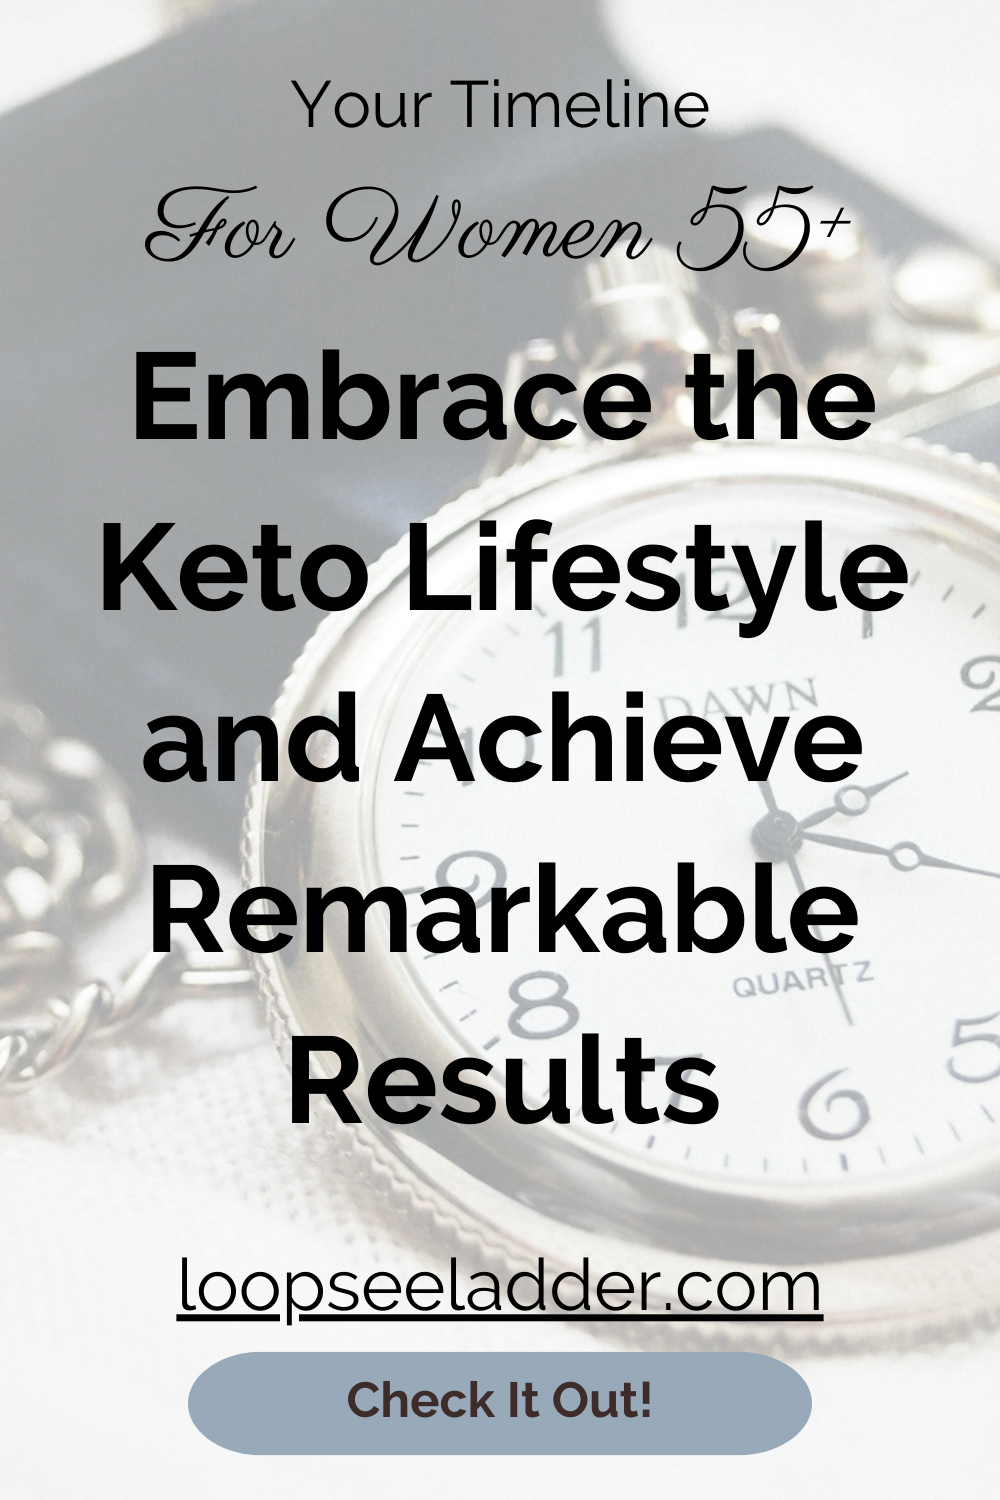 Why Women 55+ are Embracing the Keto Diet and Achieving Remarkable Results